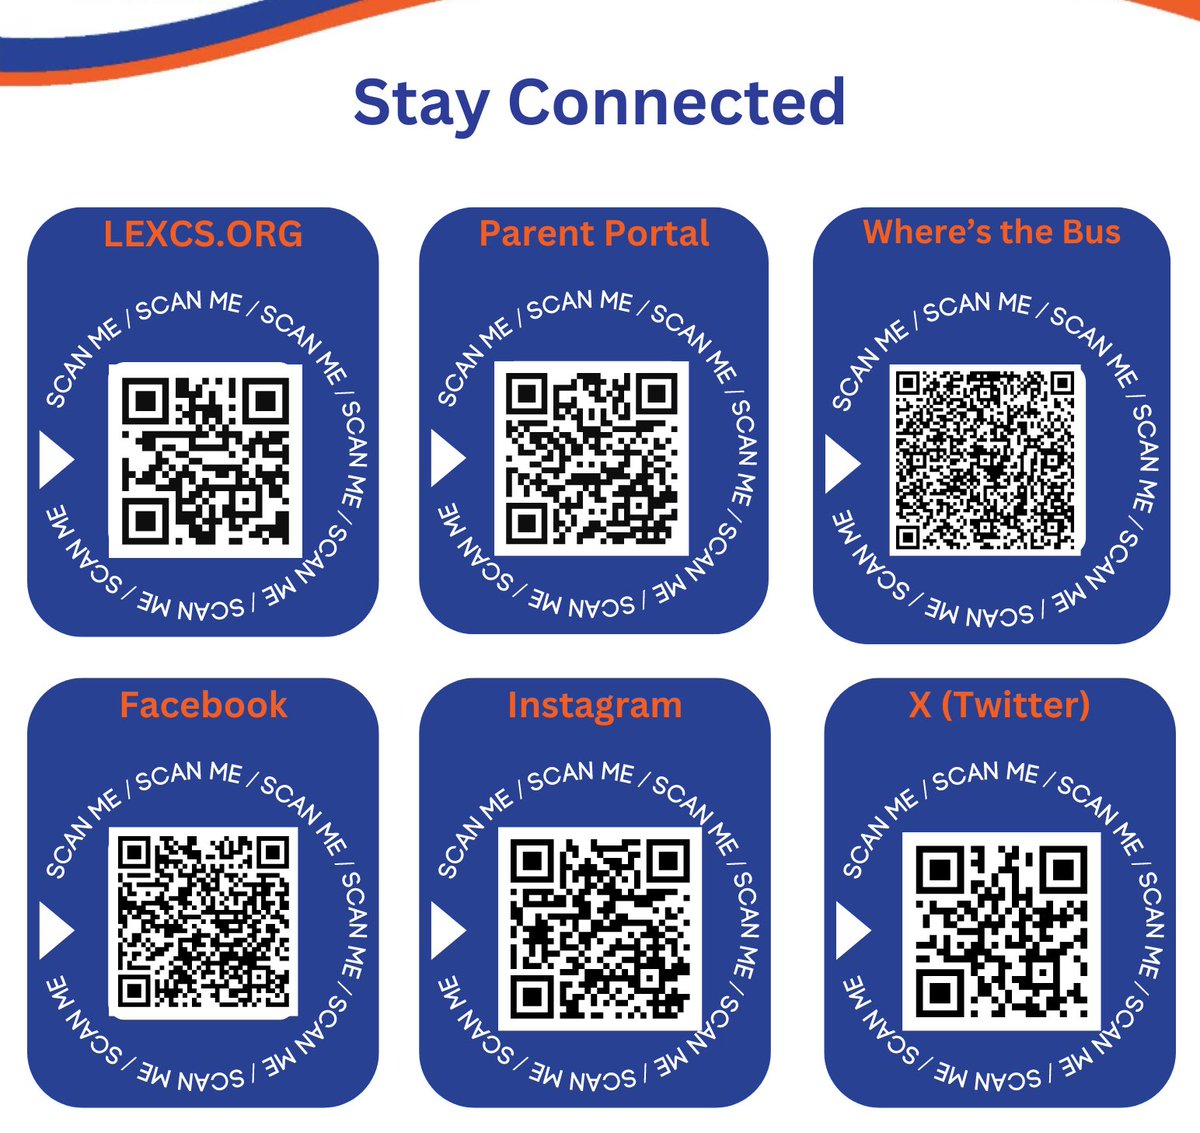 Stay Connected with LCS ! 🚀 Access the Parent Portal and track the school bus with ease. Find us on Facebook and Instagram for updates, and follow us here on X (Twitter) for the latest news! #CHOOSETHEHIVE #StayConnected